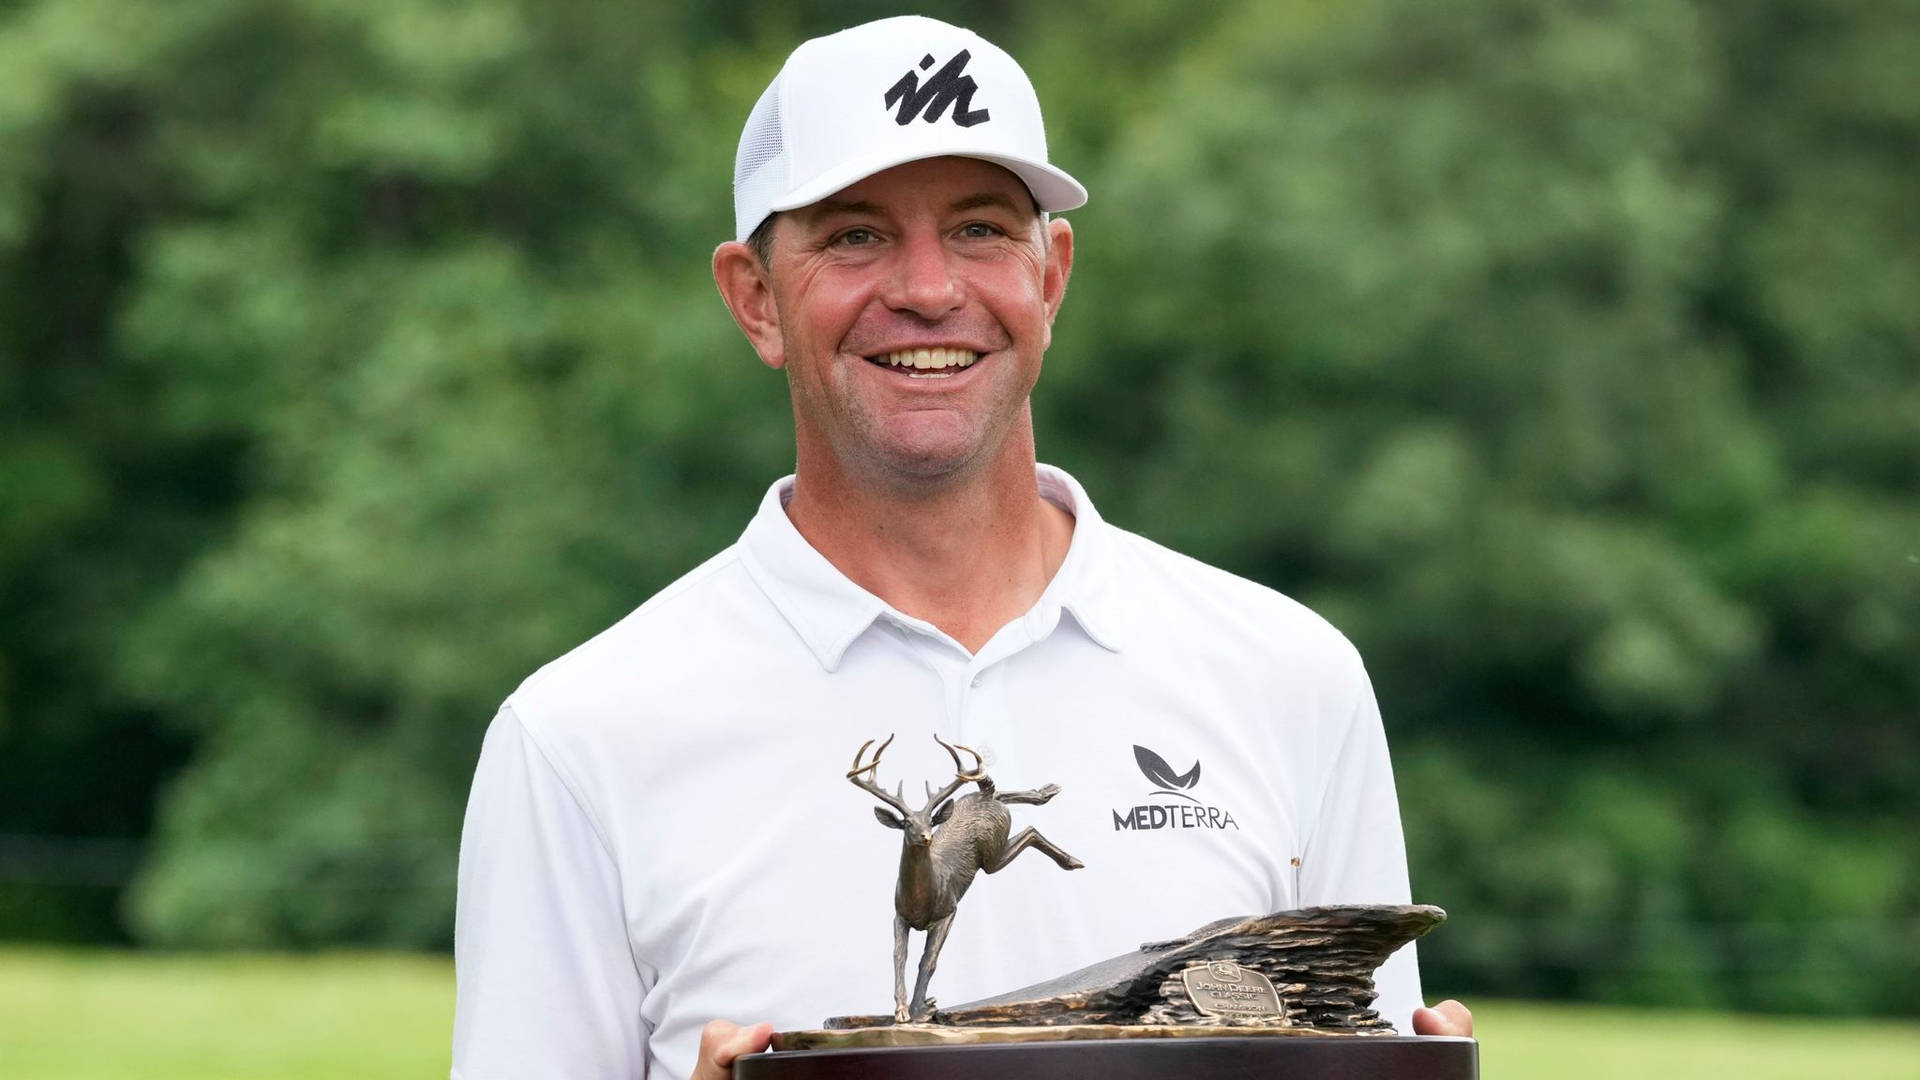 Lucas Glover Triumphantly Displaying Championship Trophy Wallpaper